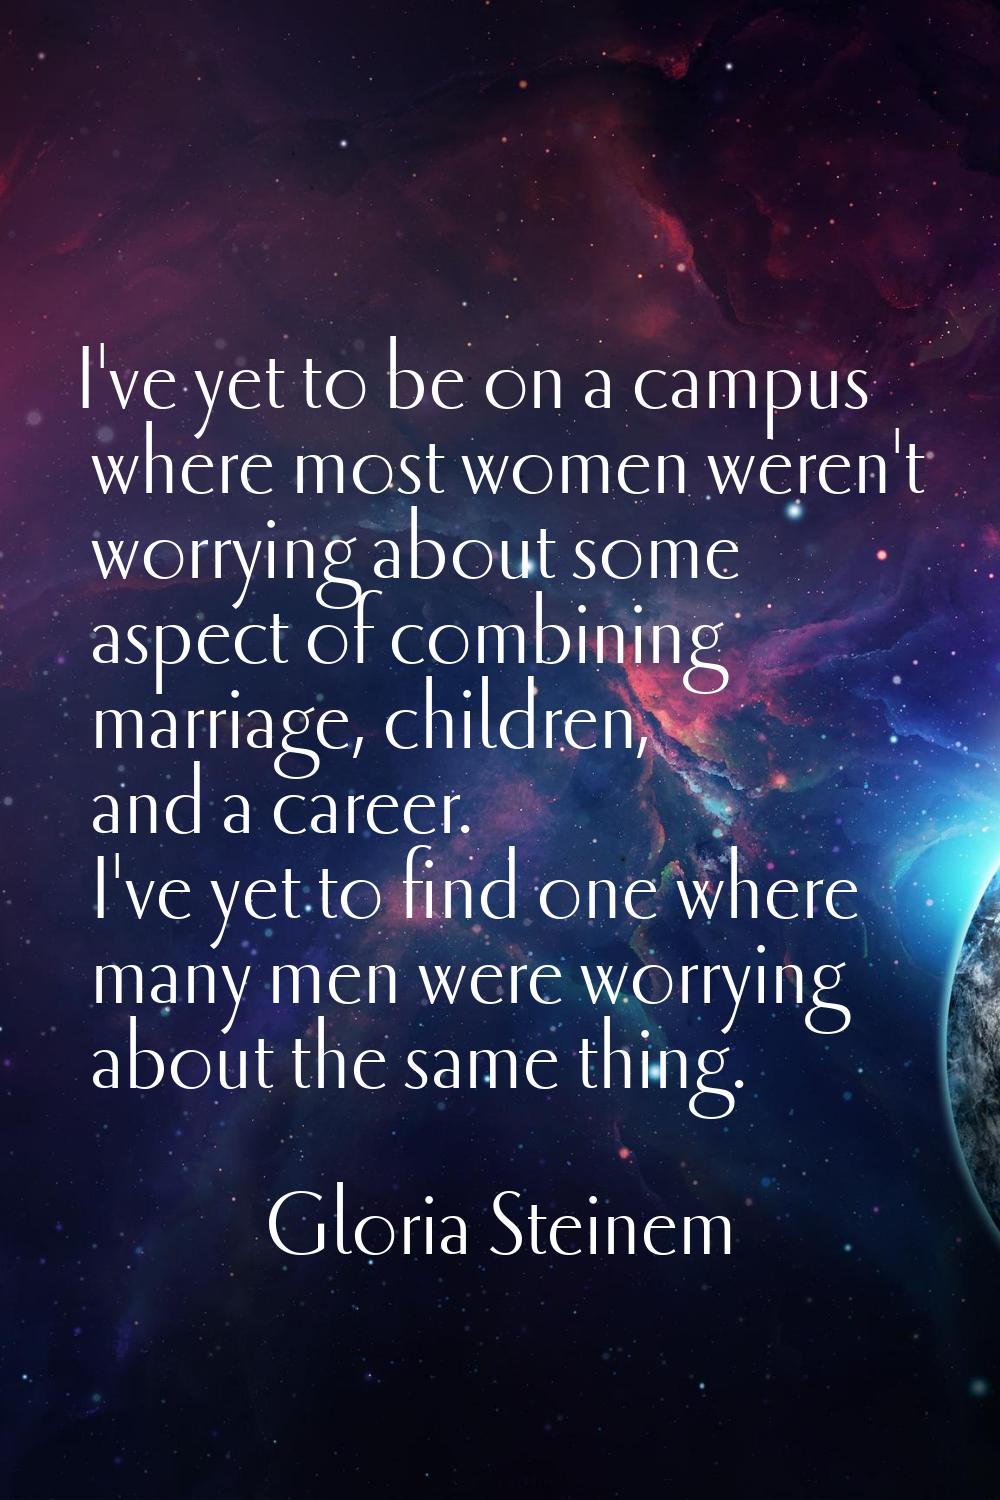 I've yet to be on a campus where most women weren't worrying about some aspect of combining marriag